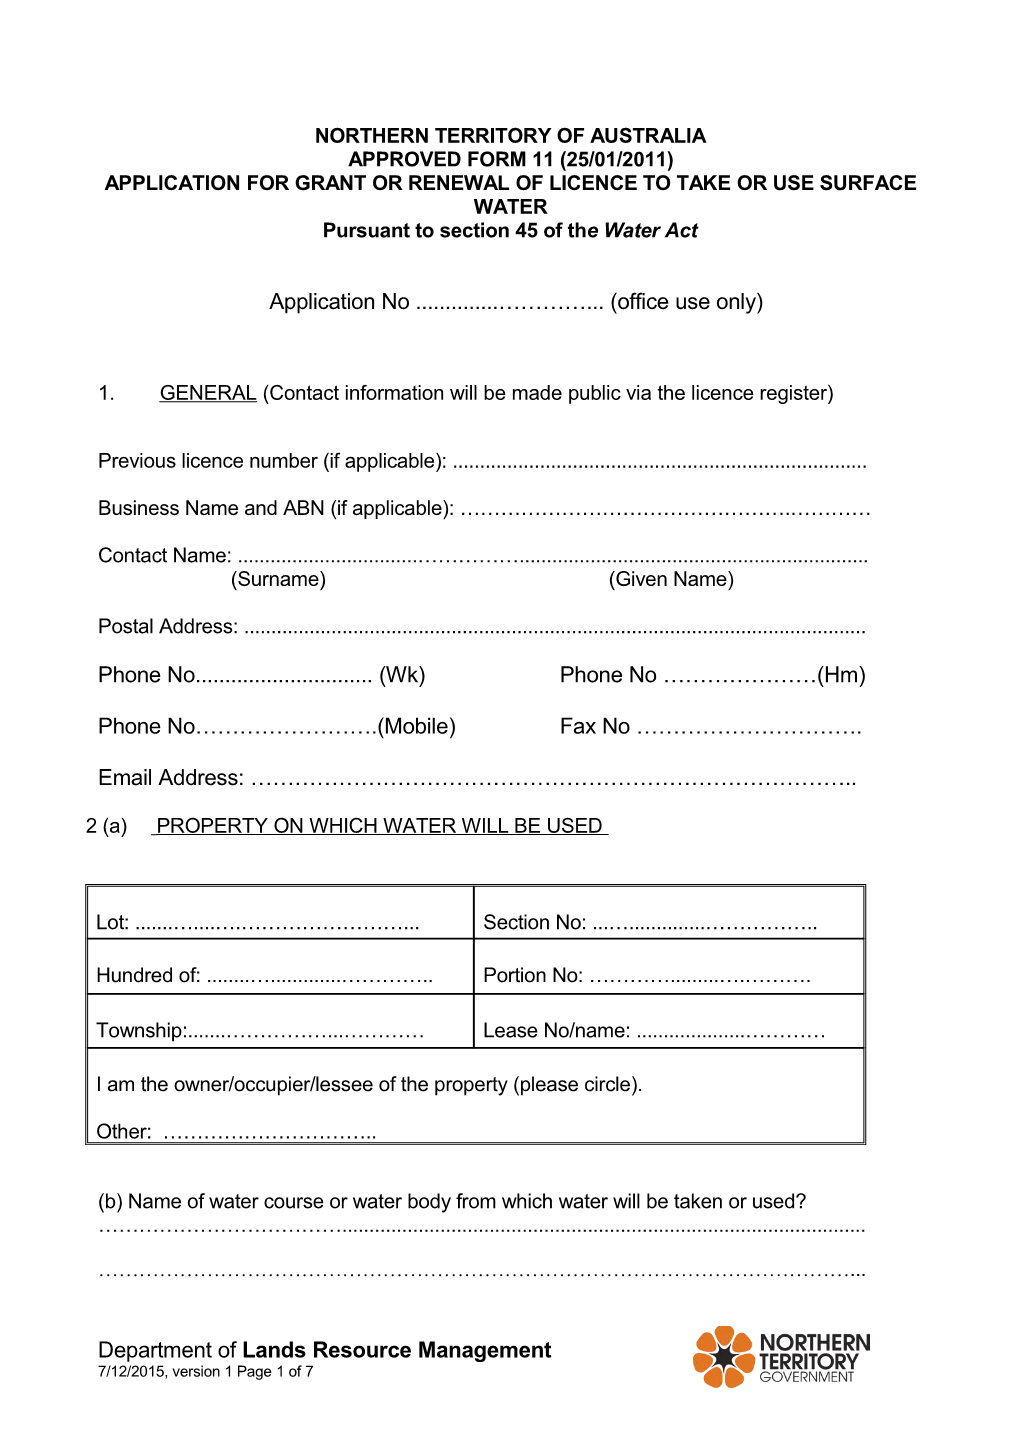 Form 11 - Application for Grant Or Renewal-SWEL